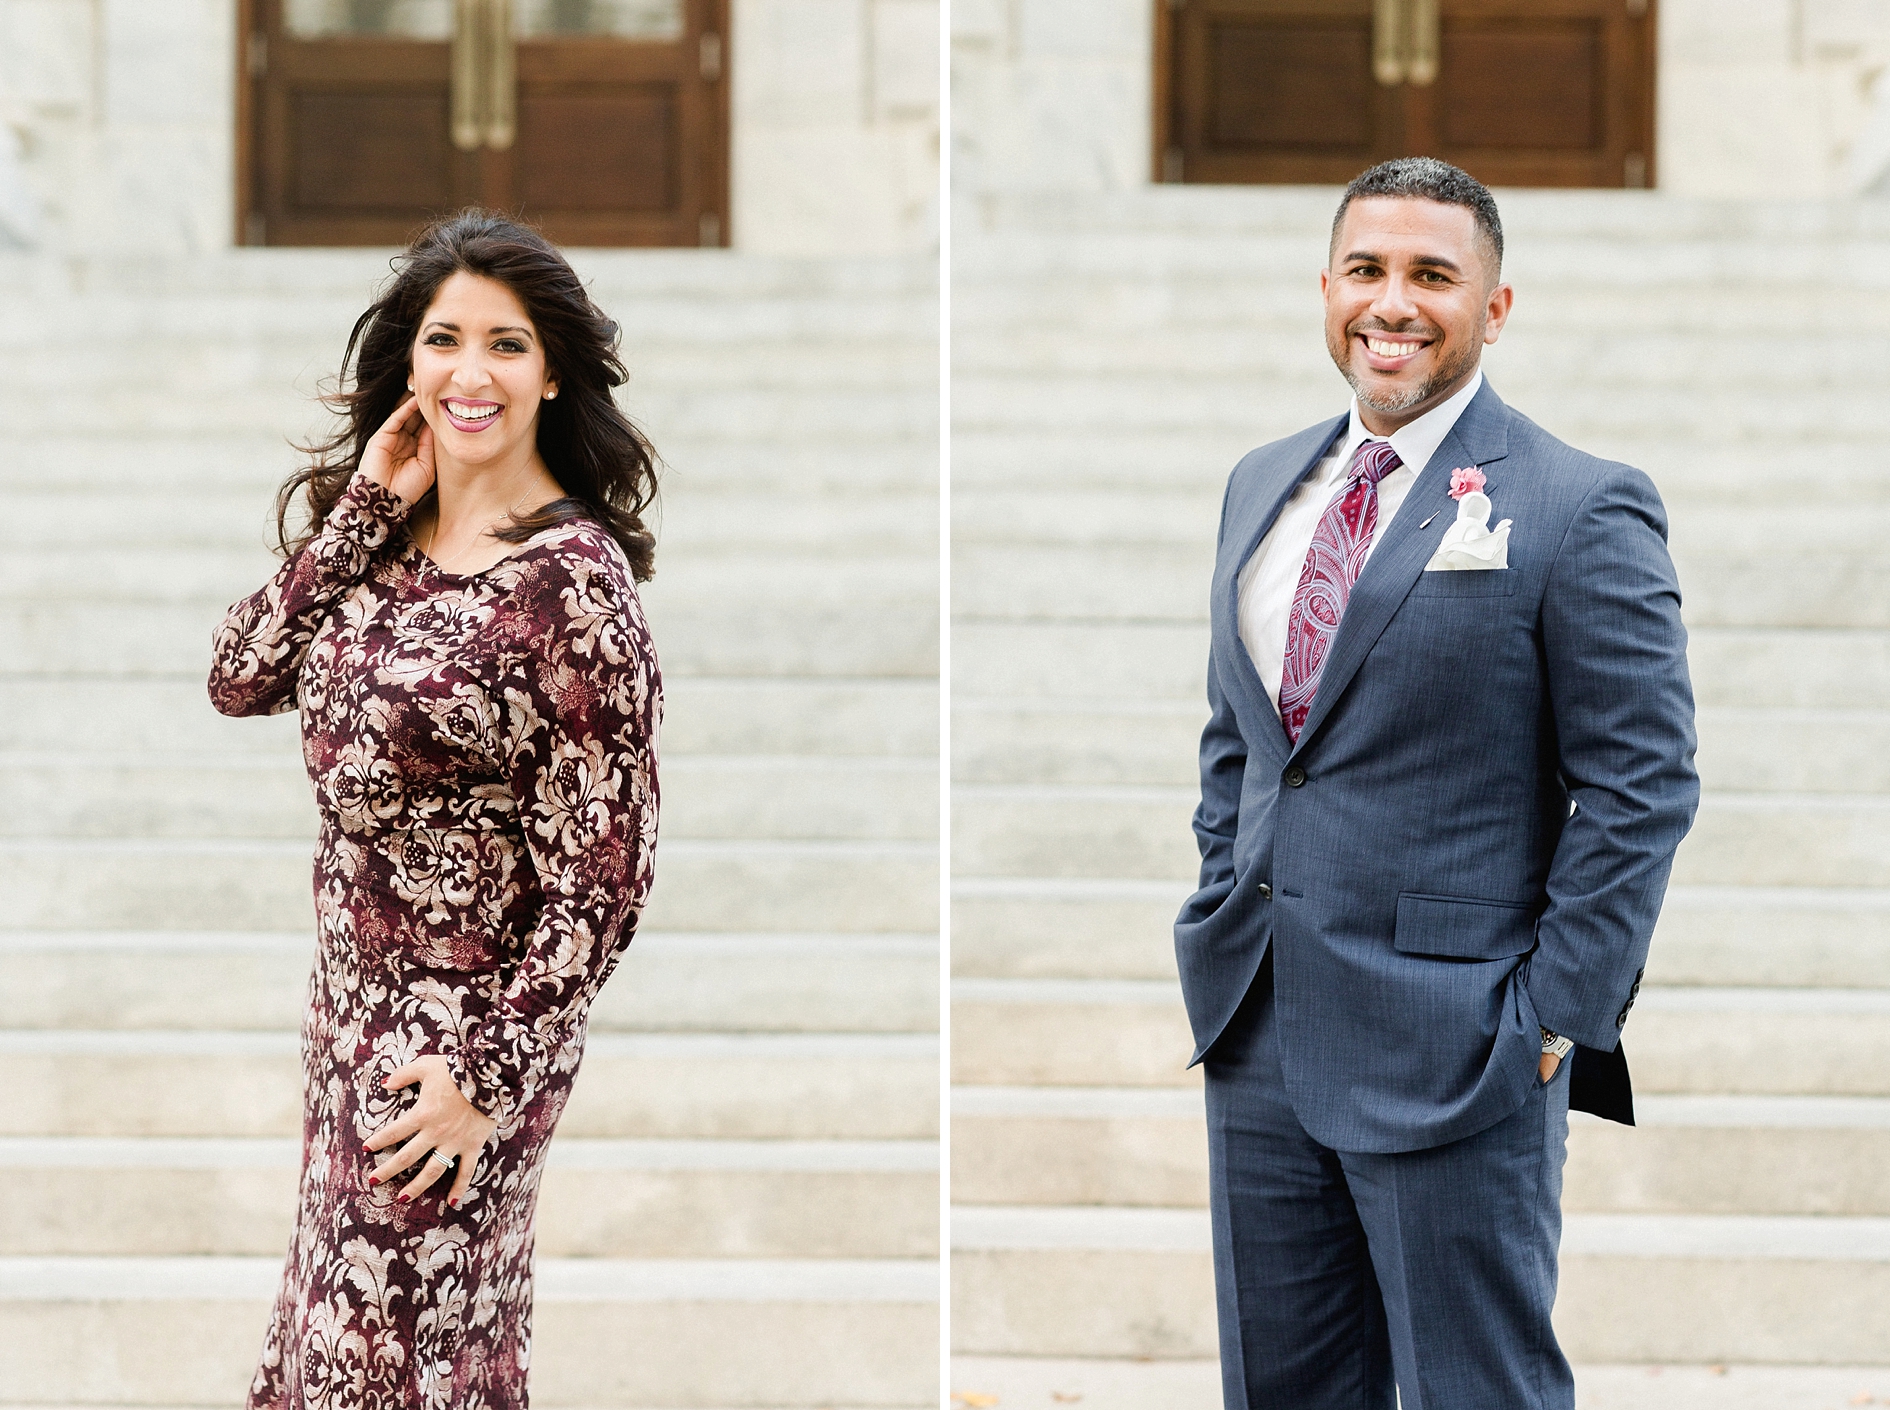 Tampa Mini Session | © Ailyn La Torre Photography 2015